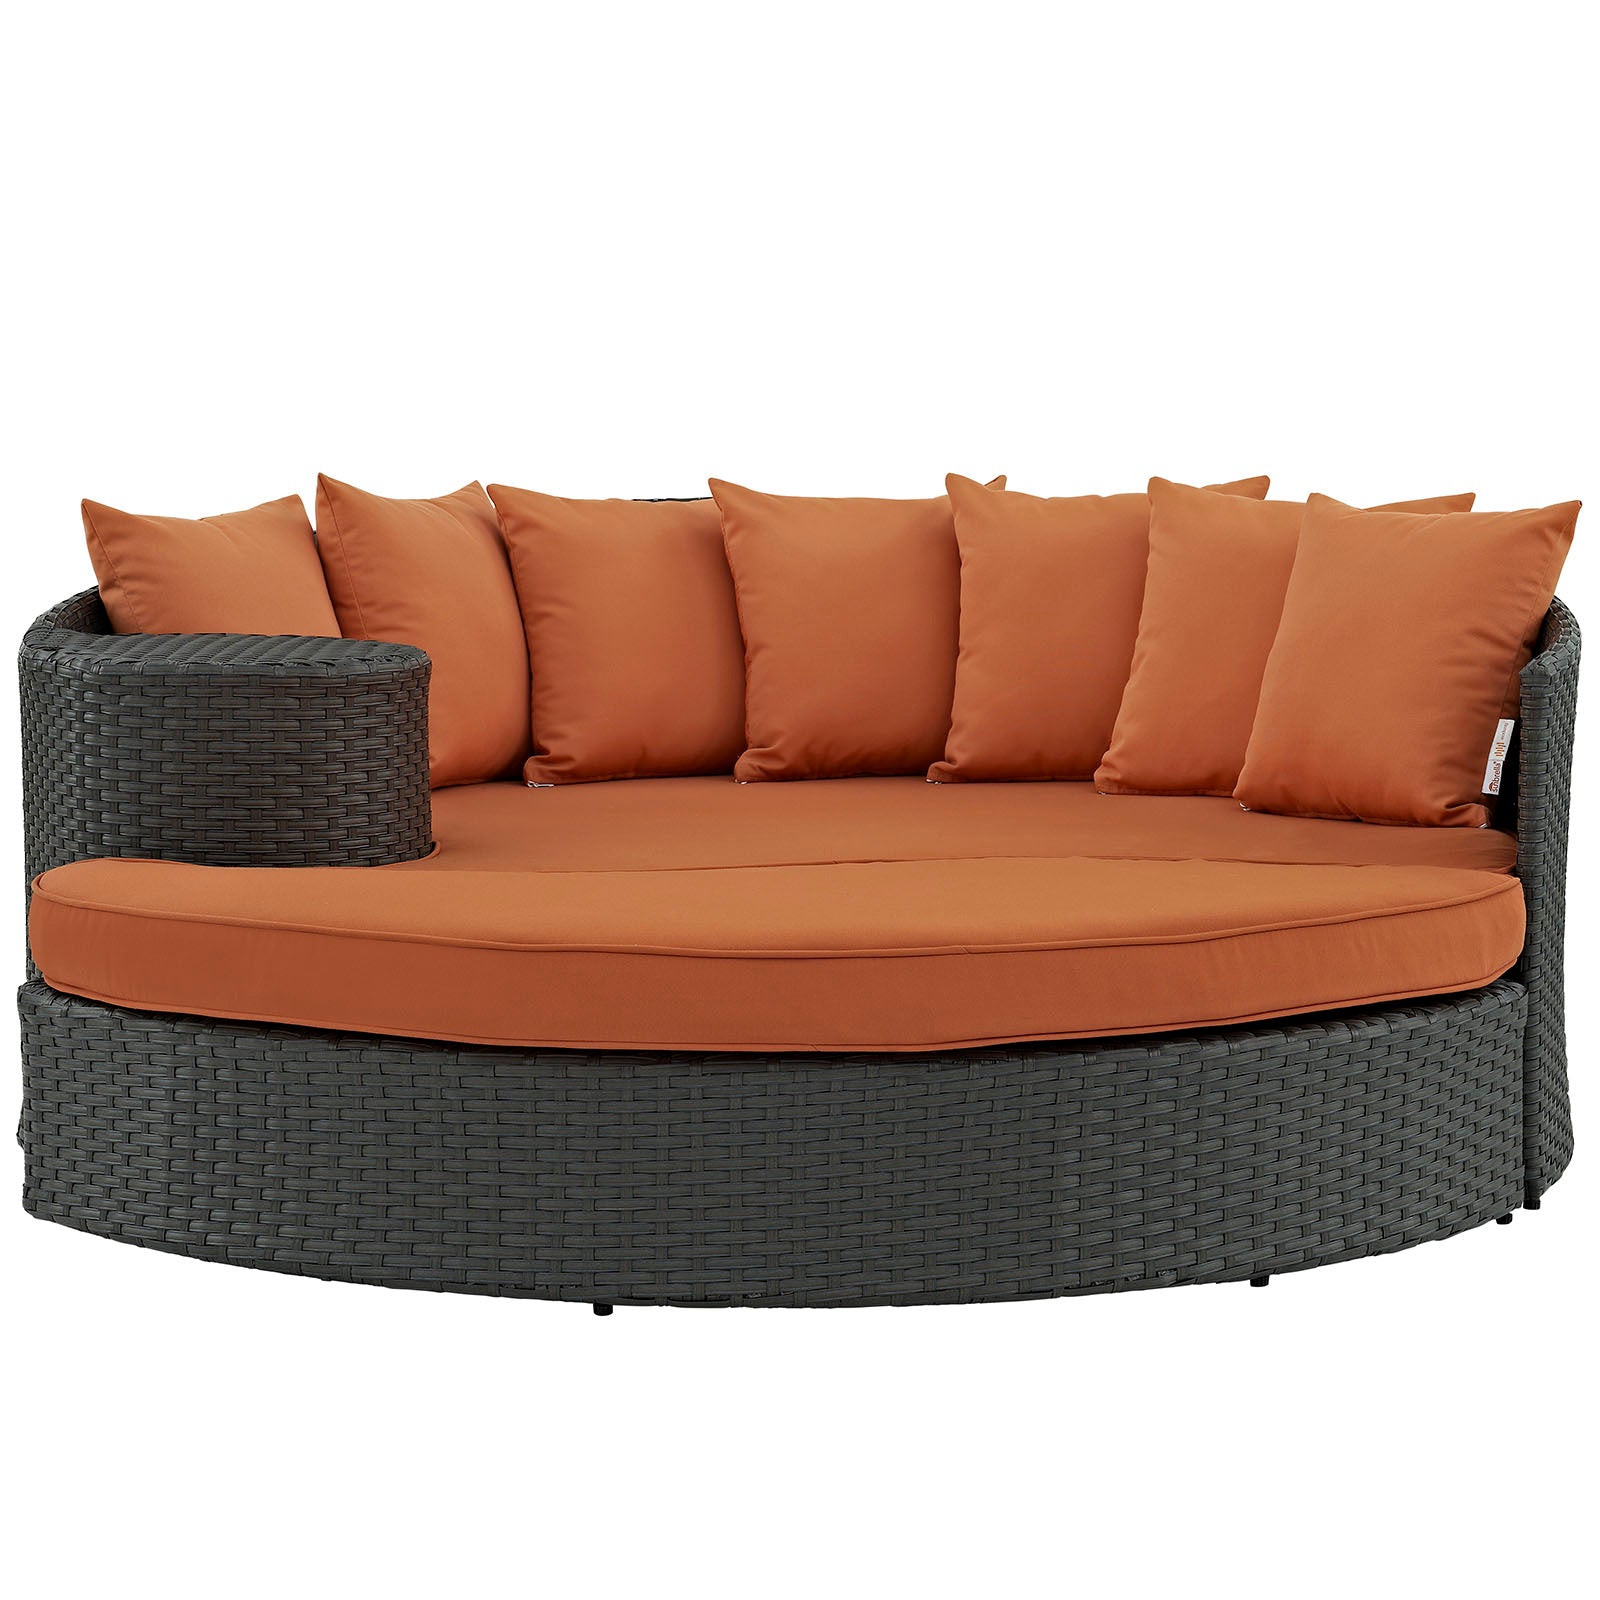 Sojourn Outdoor Patio Sunbrella® Daybed - East Shore Modern Home Furnishings